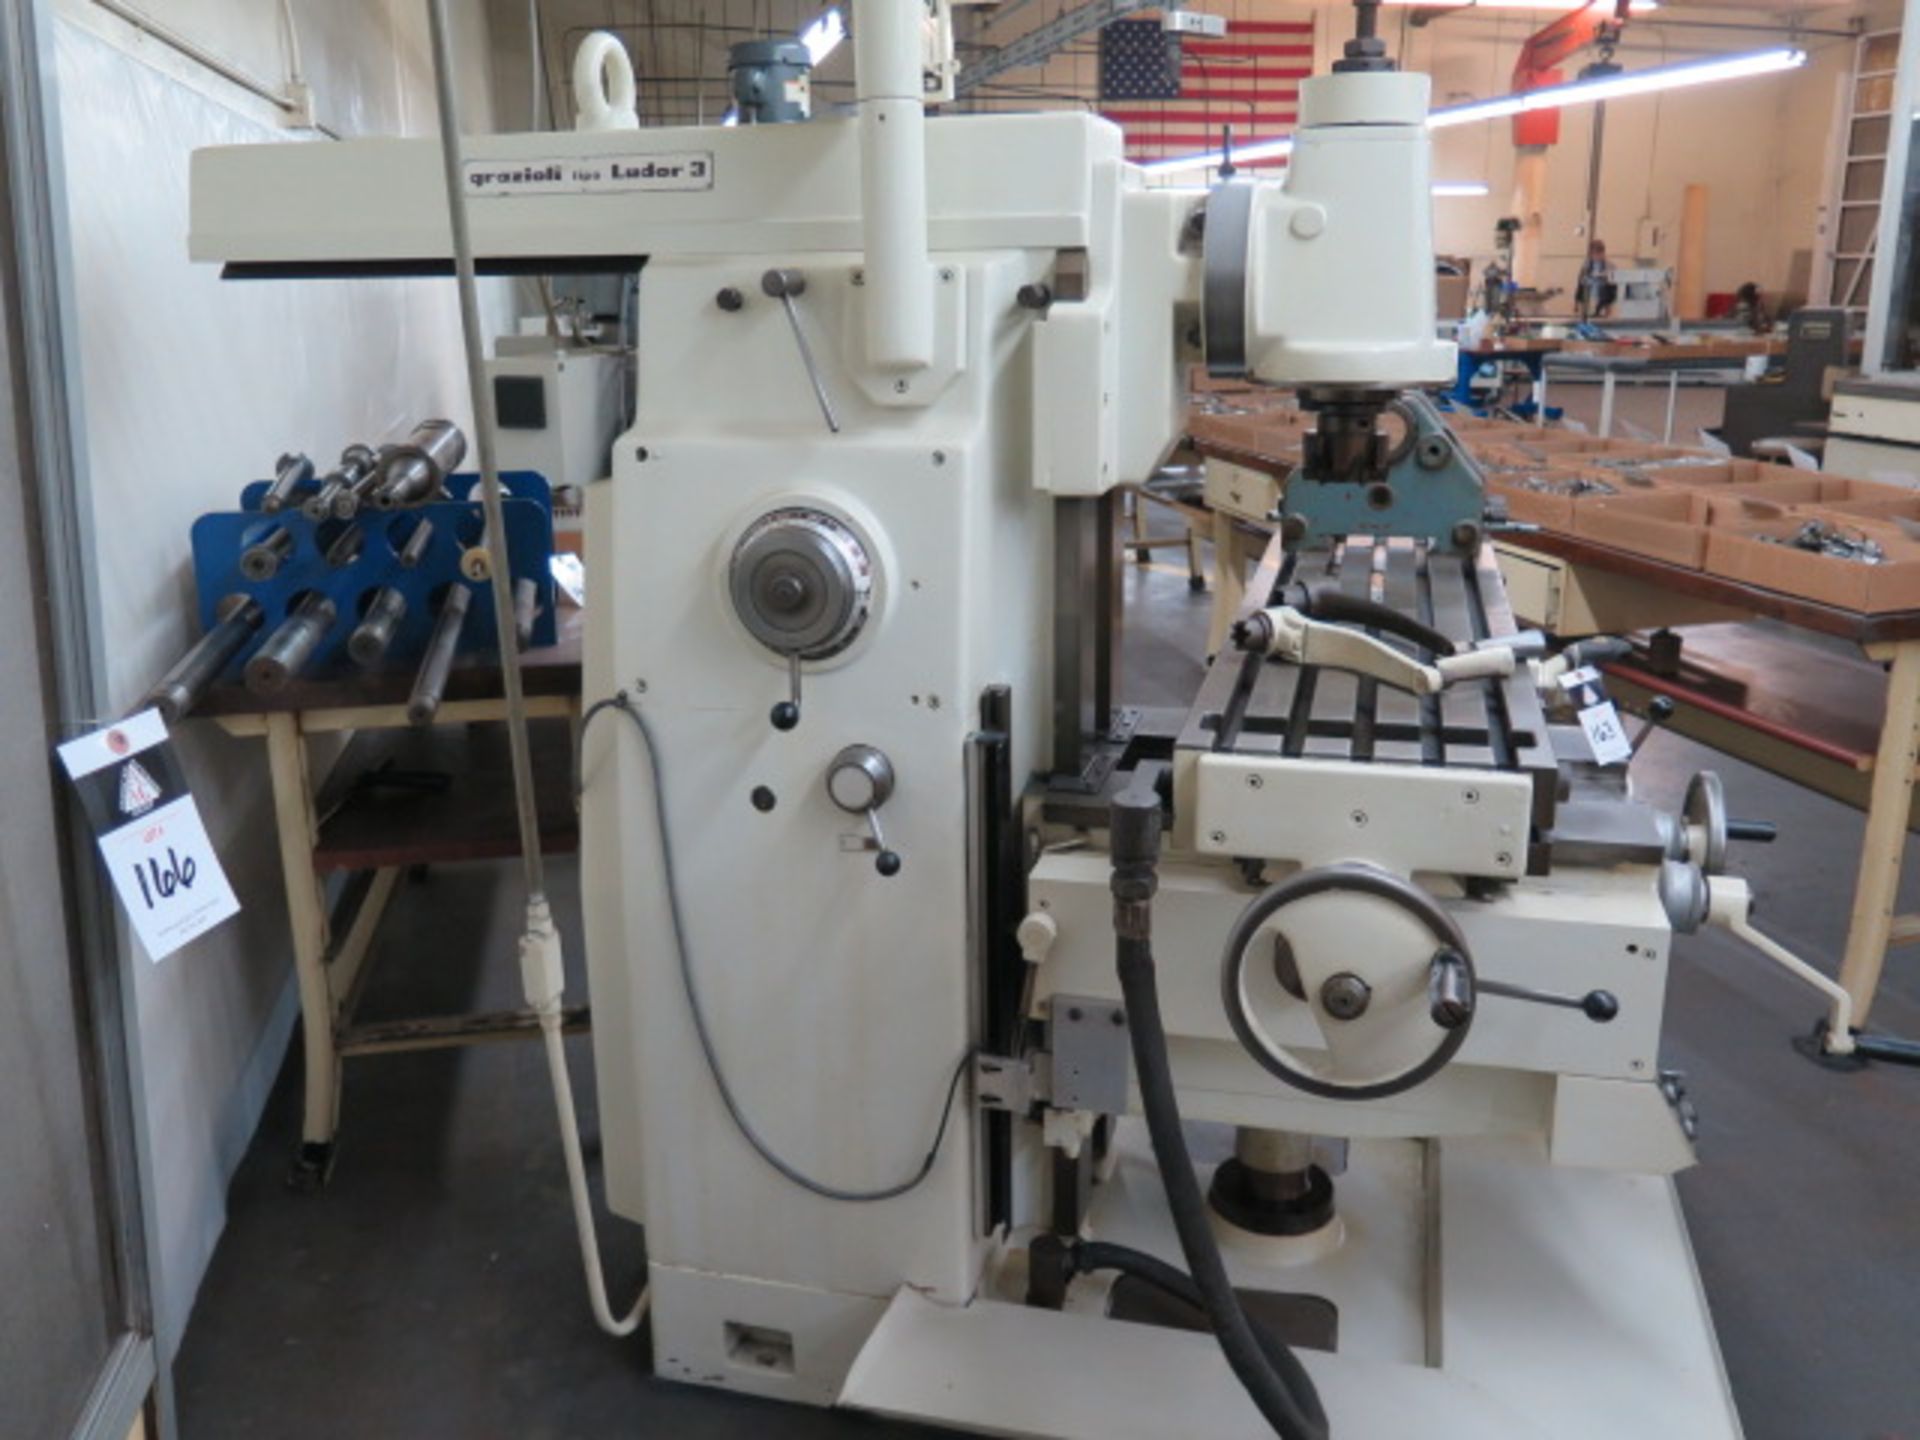 Grazioli Ludor 3 Universal Mill w/ 50-Taper Universal Vertical Milling Head, Power Feeds, SOLD AS IS - Image 8 of 12